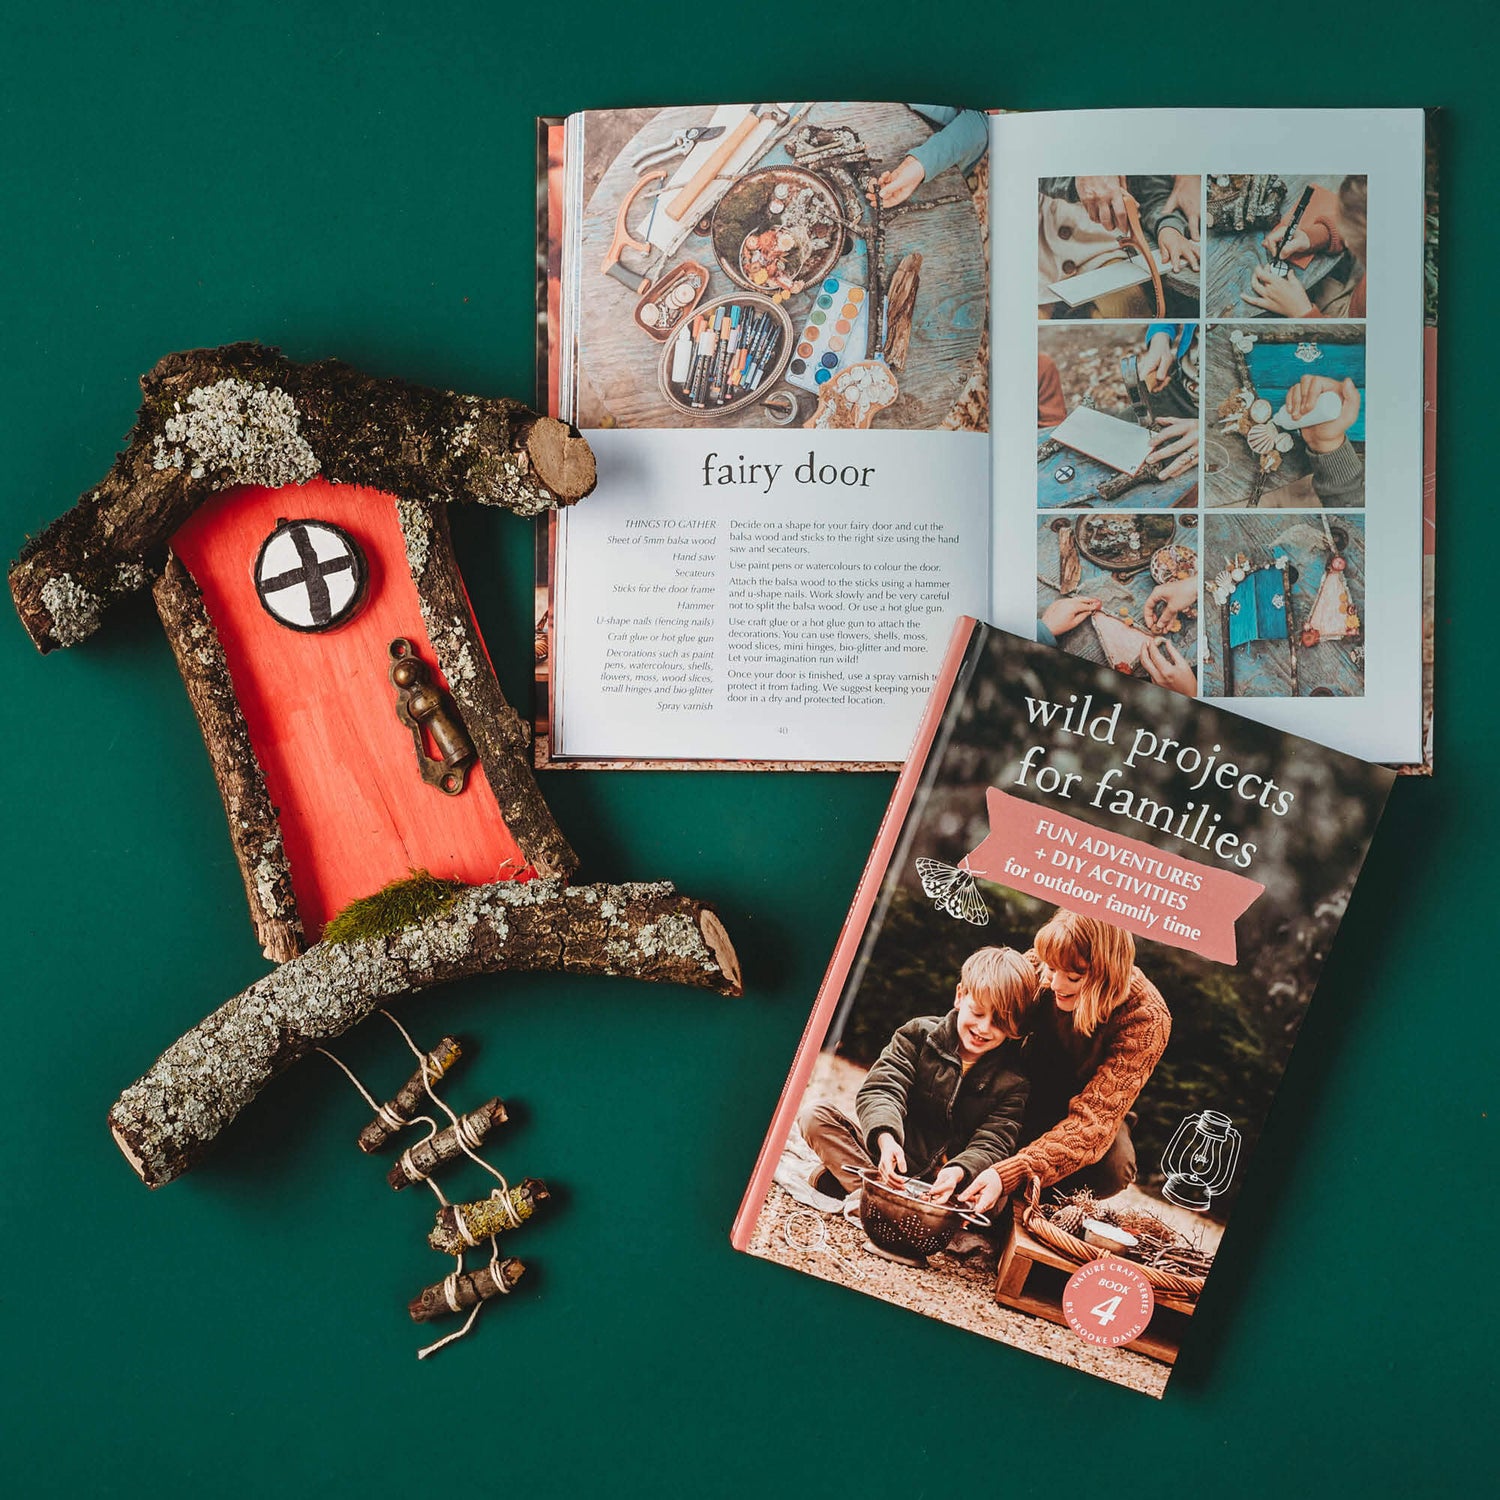 Pages from Real Tools Bundle by Your Wild Books includes Wild Projects for Families book, whittling knife, hand drill and fire starter.